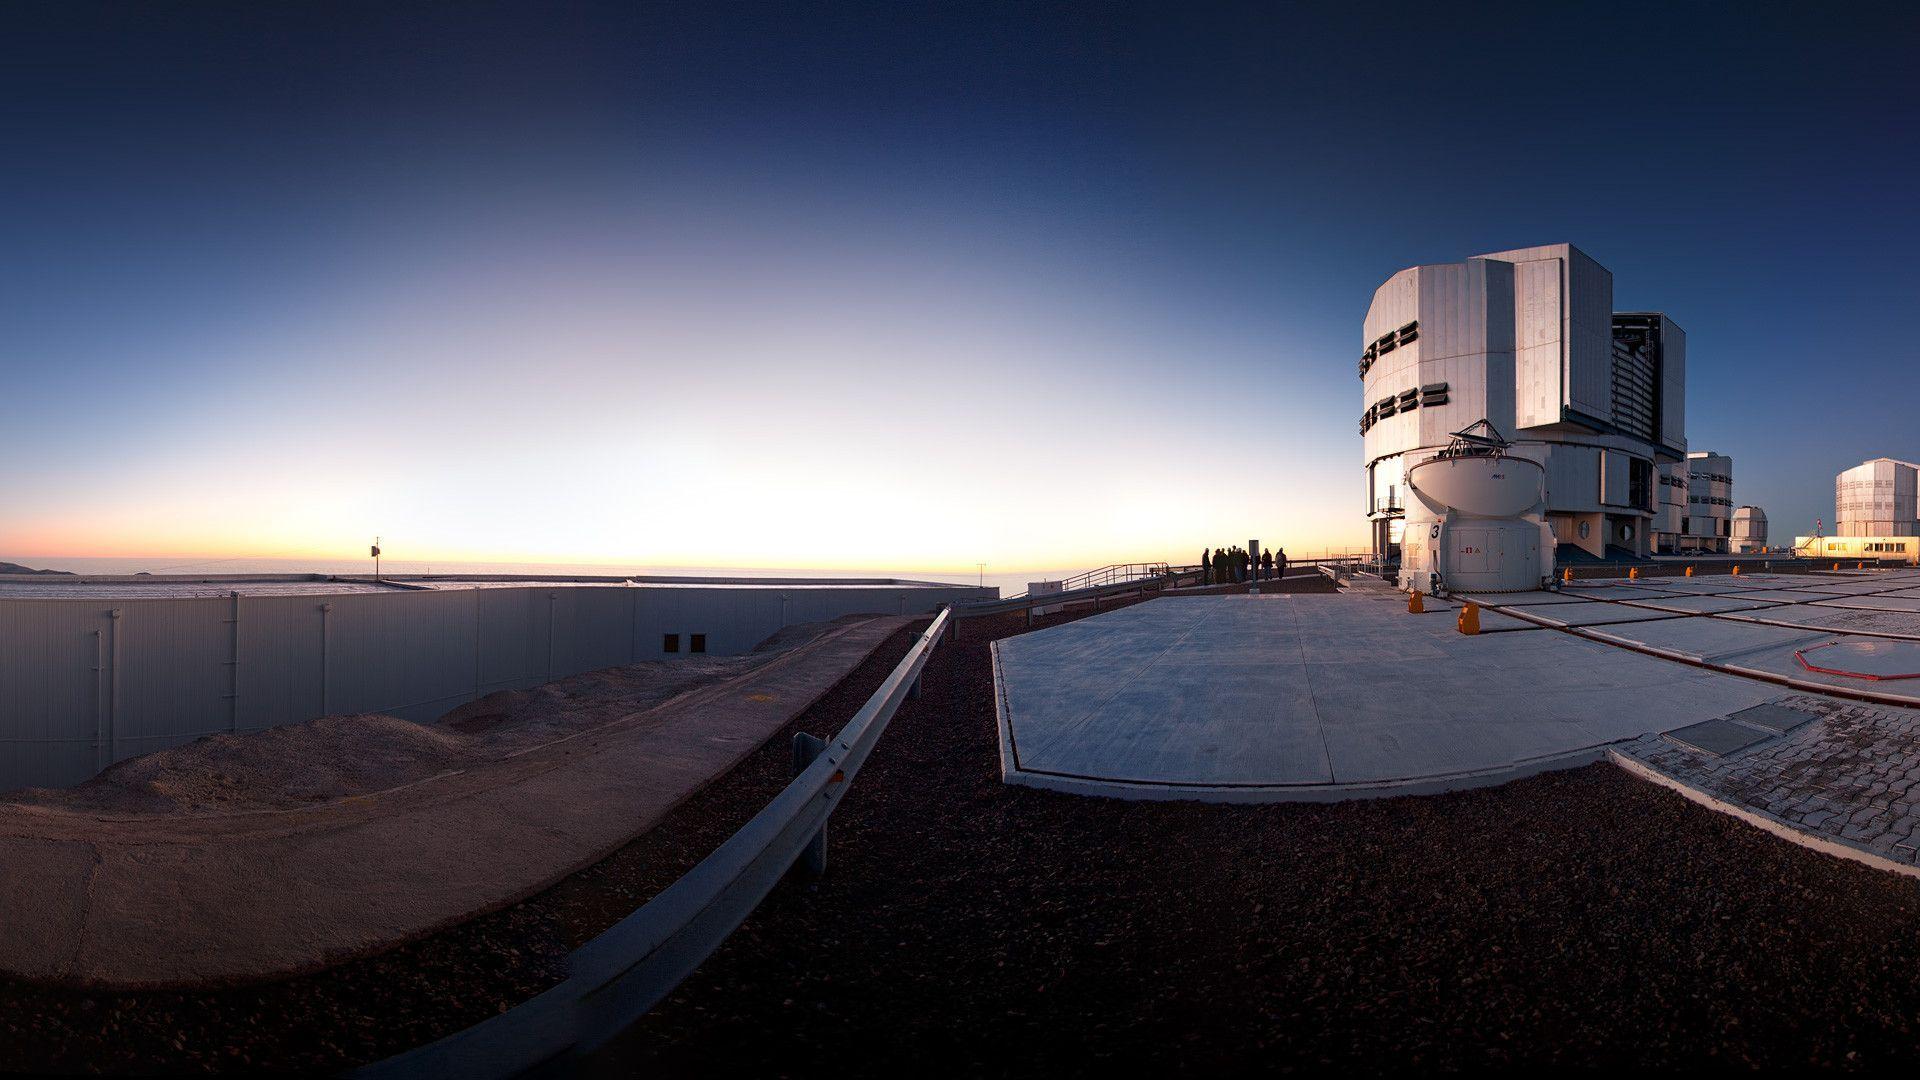 Very Large Telescope Ready for Action (wallpaper)